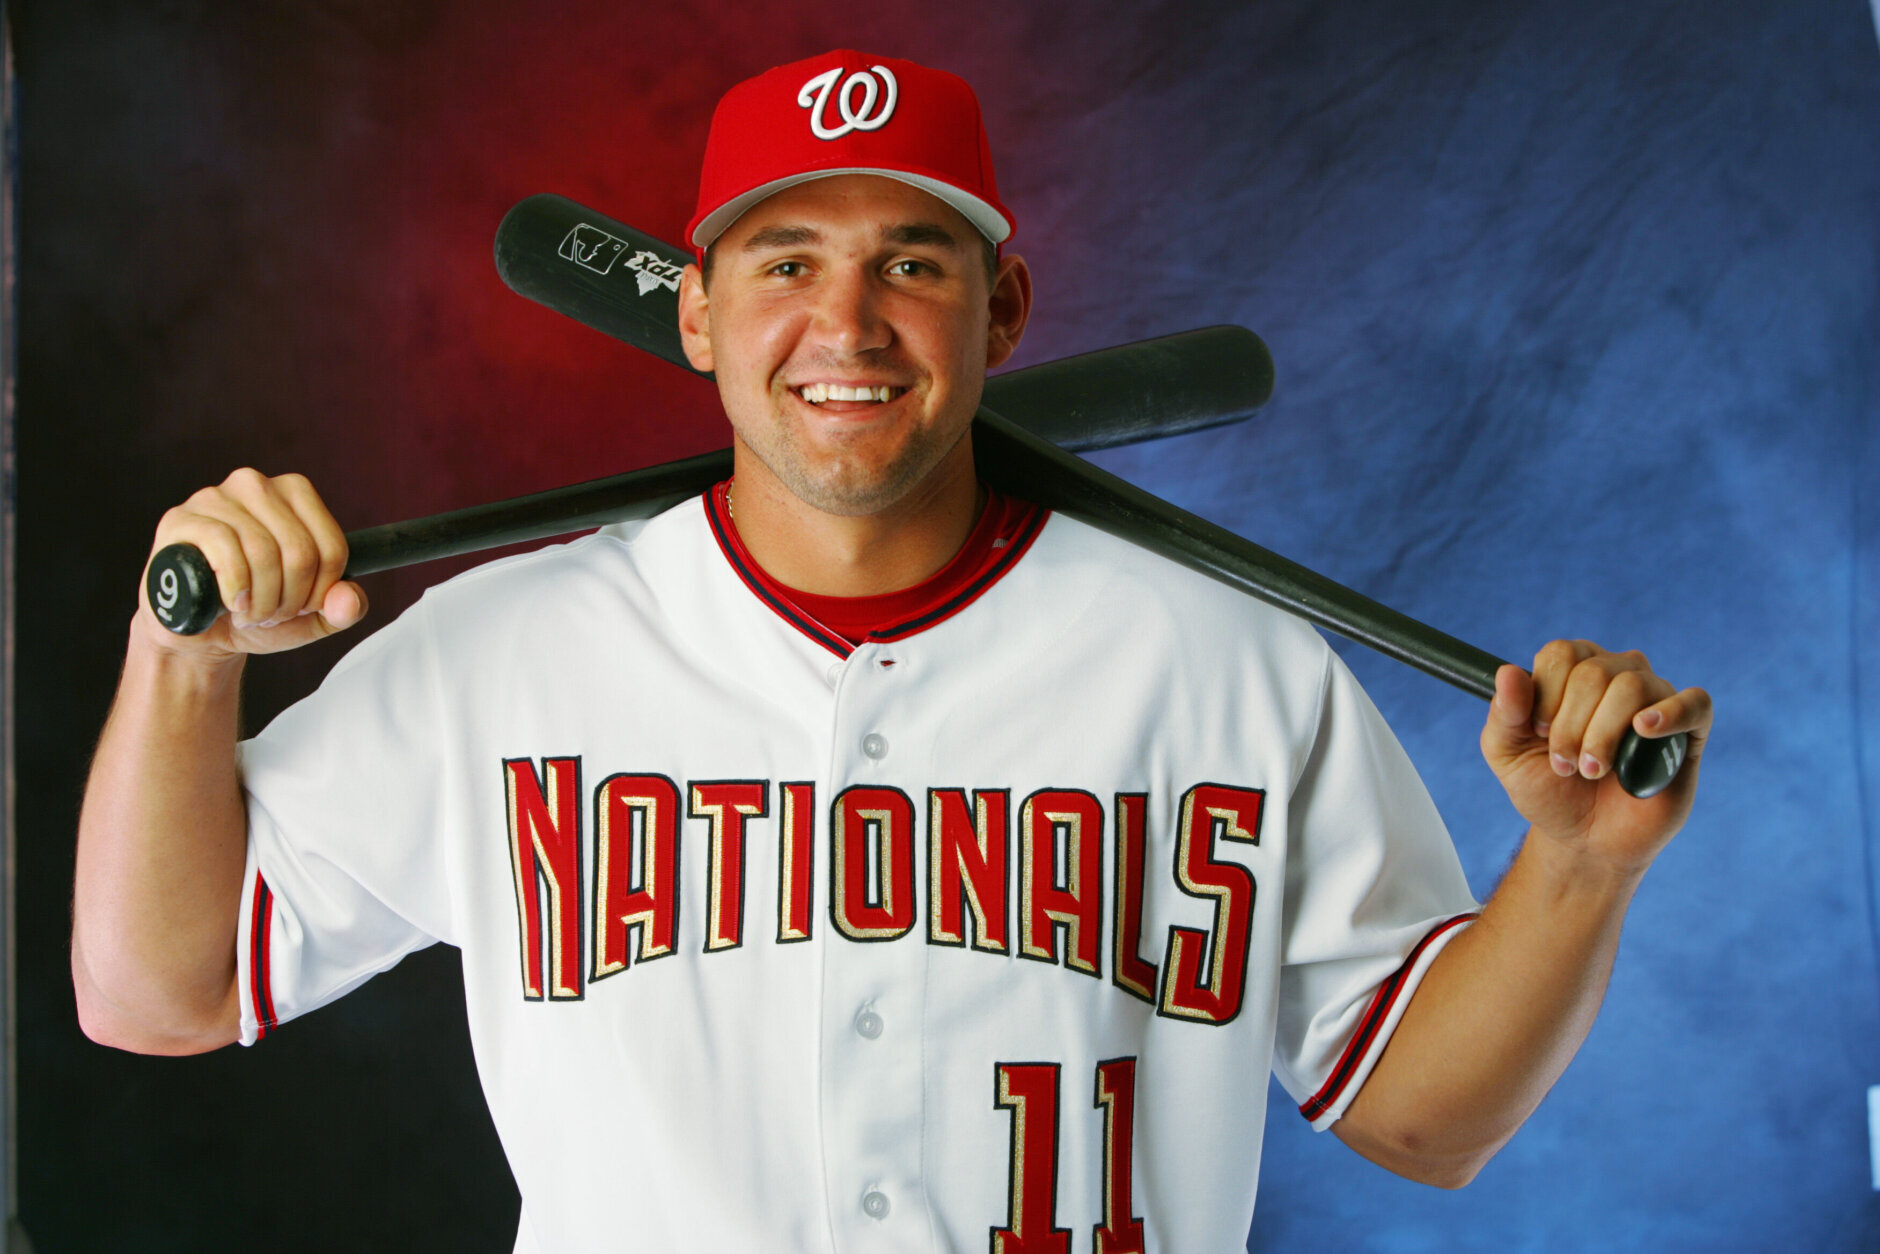 <h4>1. Auspicious debut</h4>
<p>Rookie Ryan Zimmerman made his Major League debut on Sept. 1, 2005, by pinch-hitting in an 8-7 loss to Atlanta. He wore No. 25 as Junior Spivey was still with the club.</p>
<p>Jeffrey Hammonds also wore No. 11 that year for the Nats, and neither man played another day in the big leagues after that season. Zim struck out in his lone at-bat that day.</p>
<p>He’d get better …</p>
